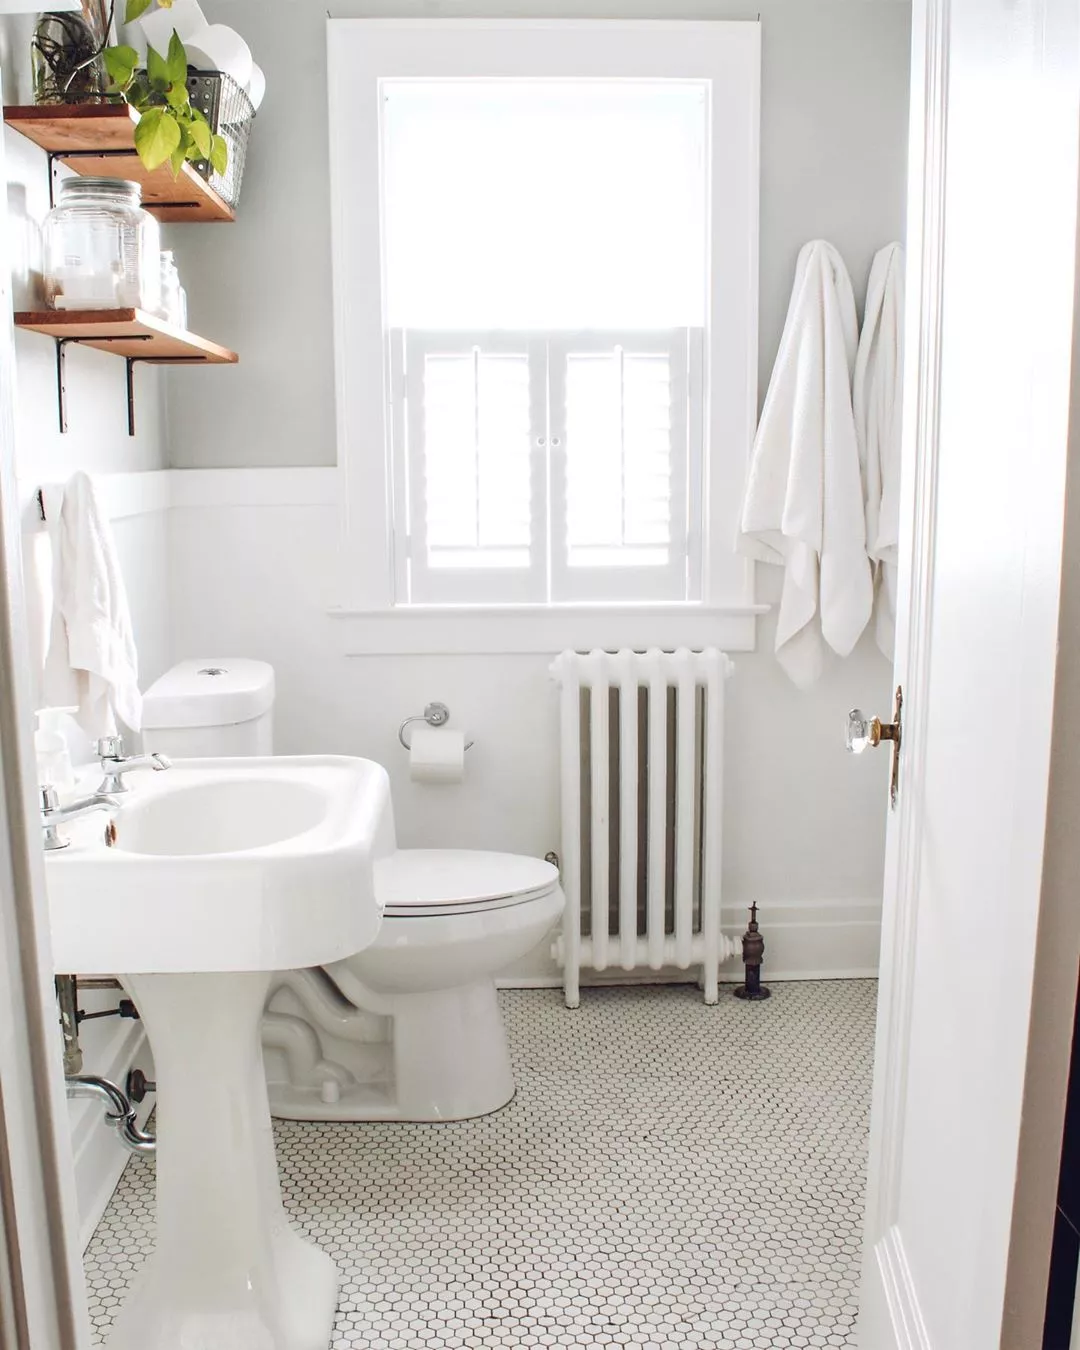 Bathroom Minimalism - How I Organize My Small Bathrooms - So Much Better  With Age